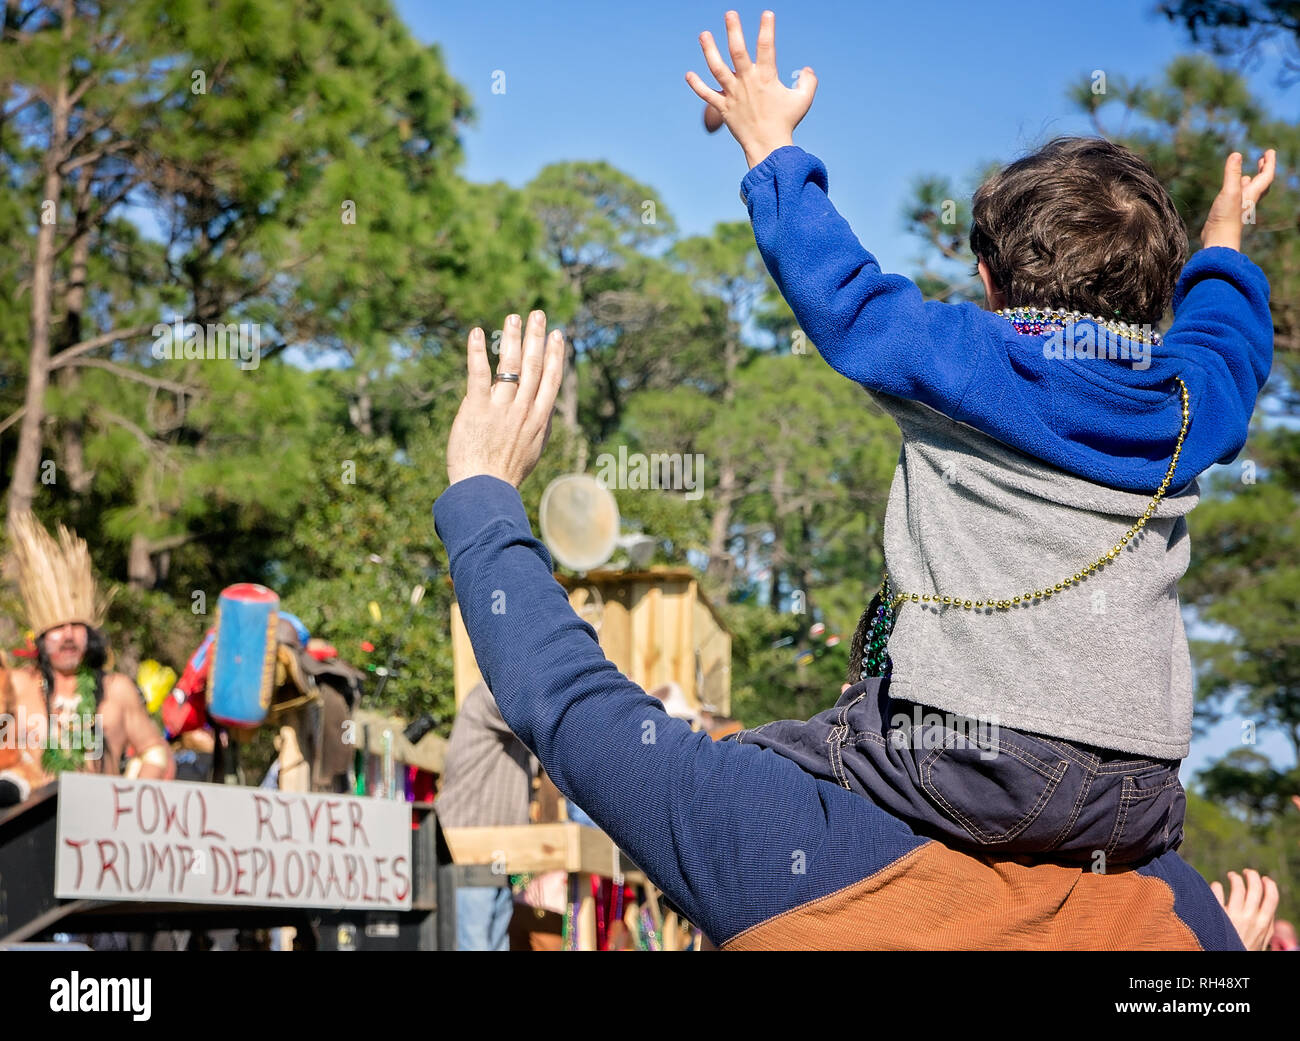 Spectators wave at a Mardi Gras float during the People’s Parade, Feb. 4, 2017 in Dauphin Island, Alabama. Stock Photo